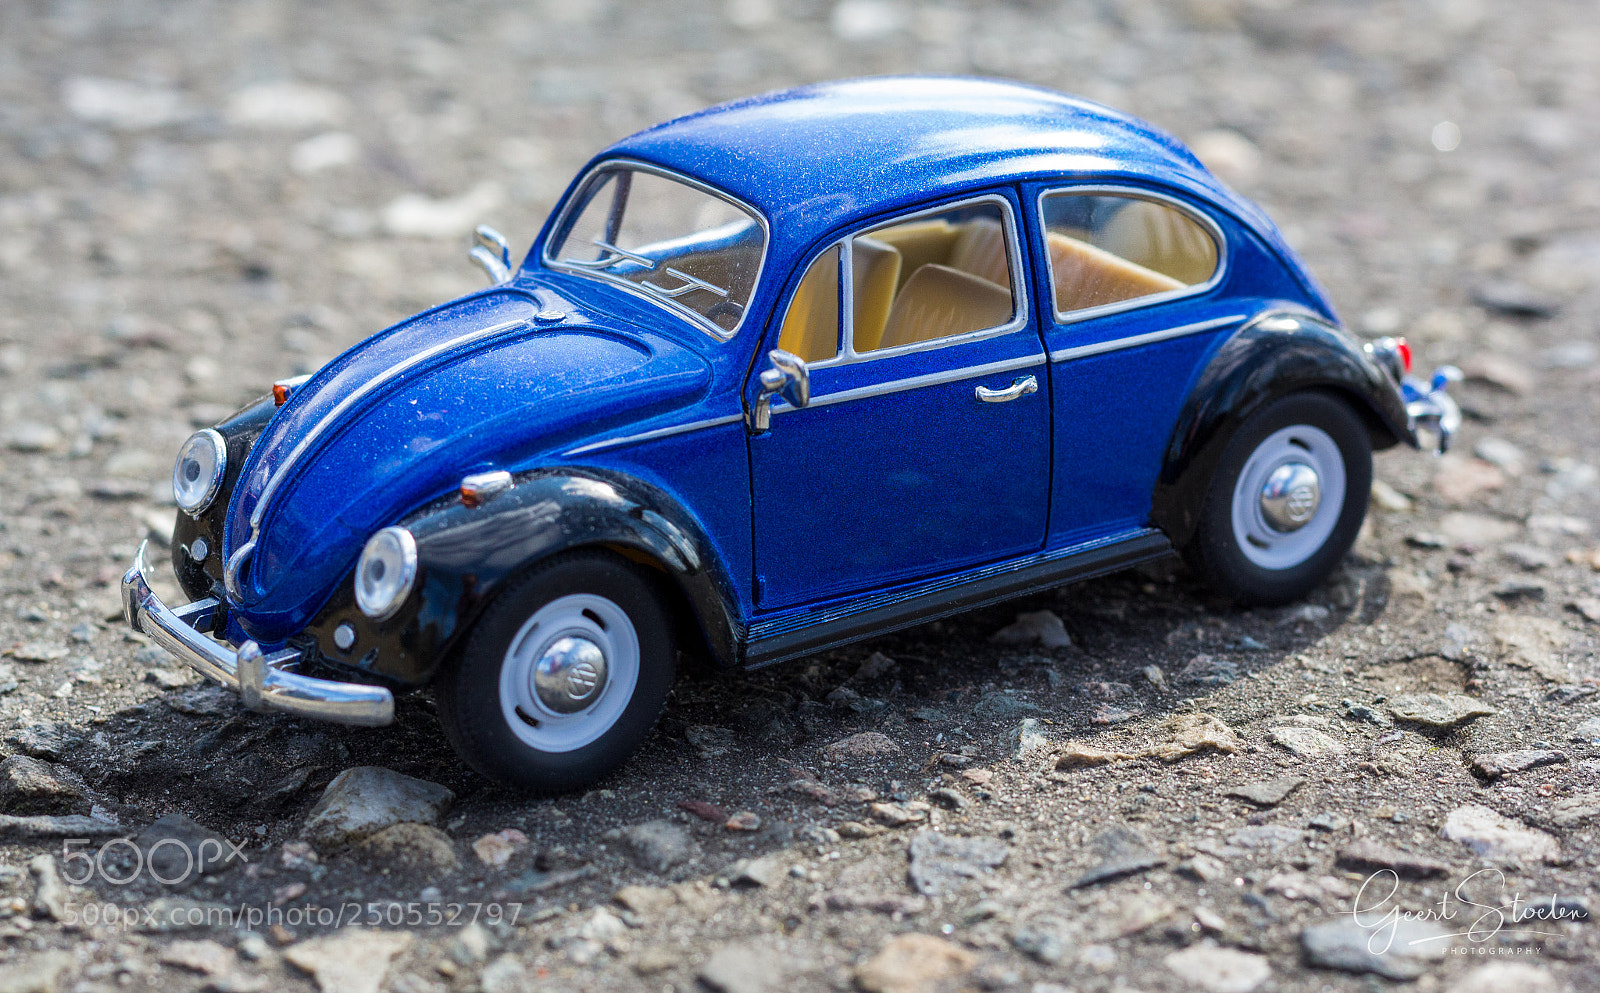 Canon EOS 60D sample photo. Vw beetle - the photography